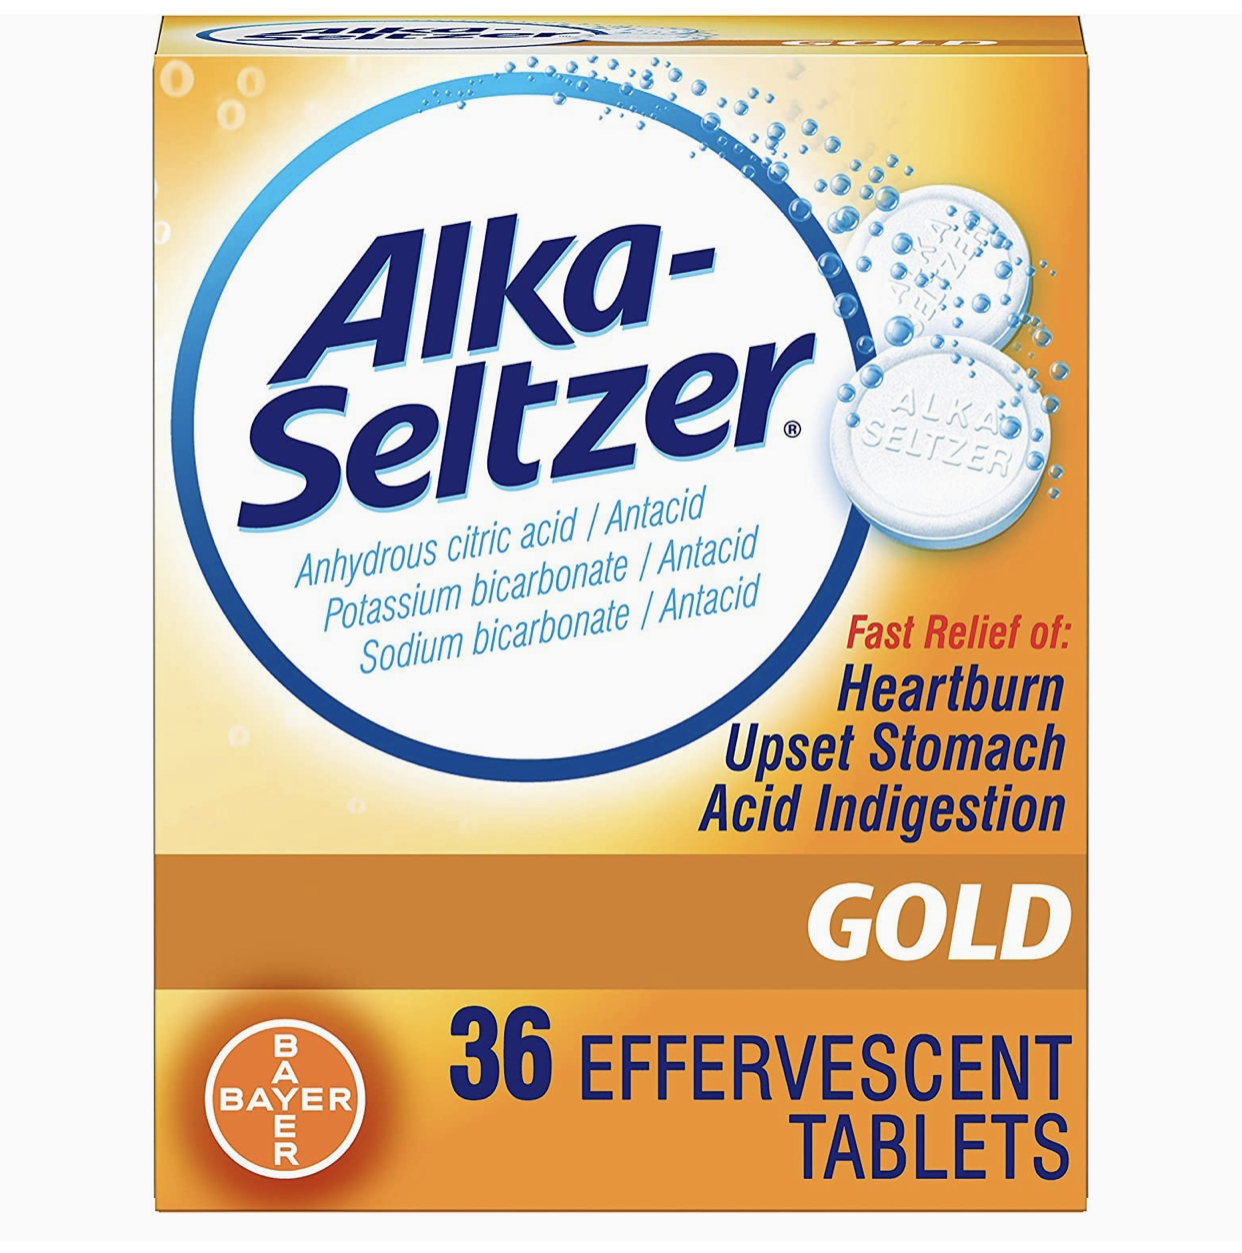 1682448741_Amazon.com2020Alka20Seltzer20Gold20-203620Effervescent20Tablets2028Pack20of204292020Health202620Household-1.png